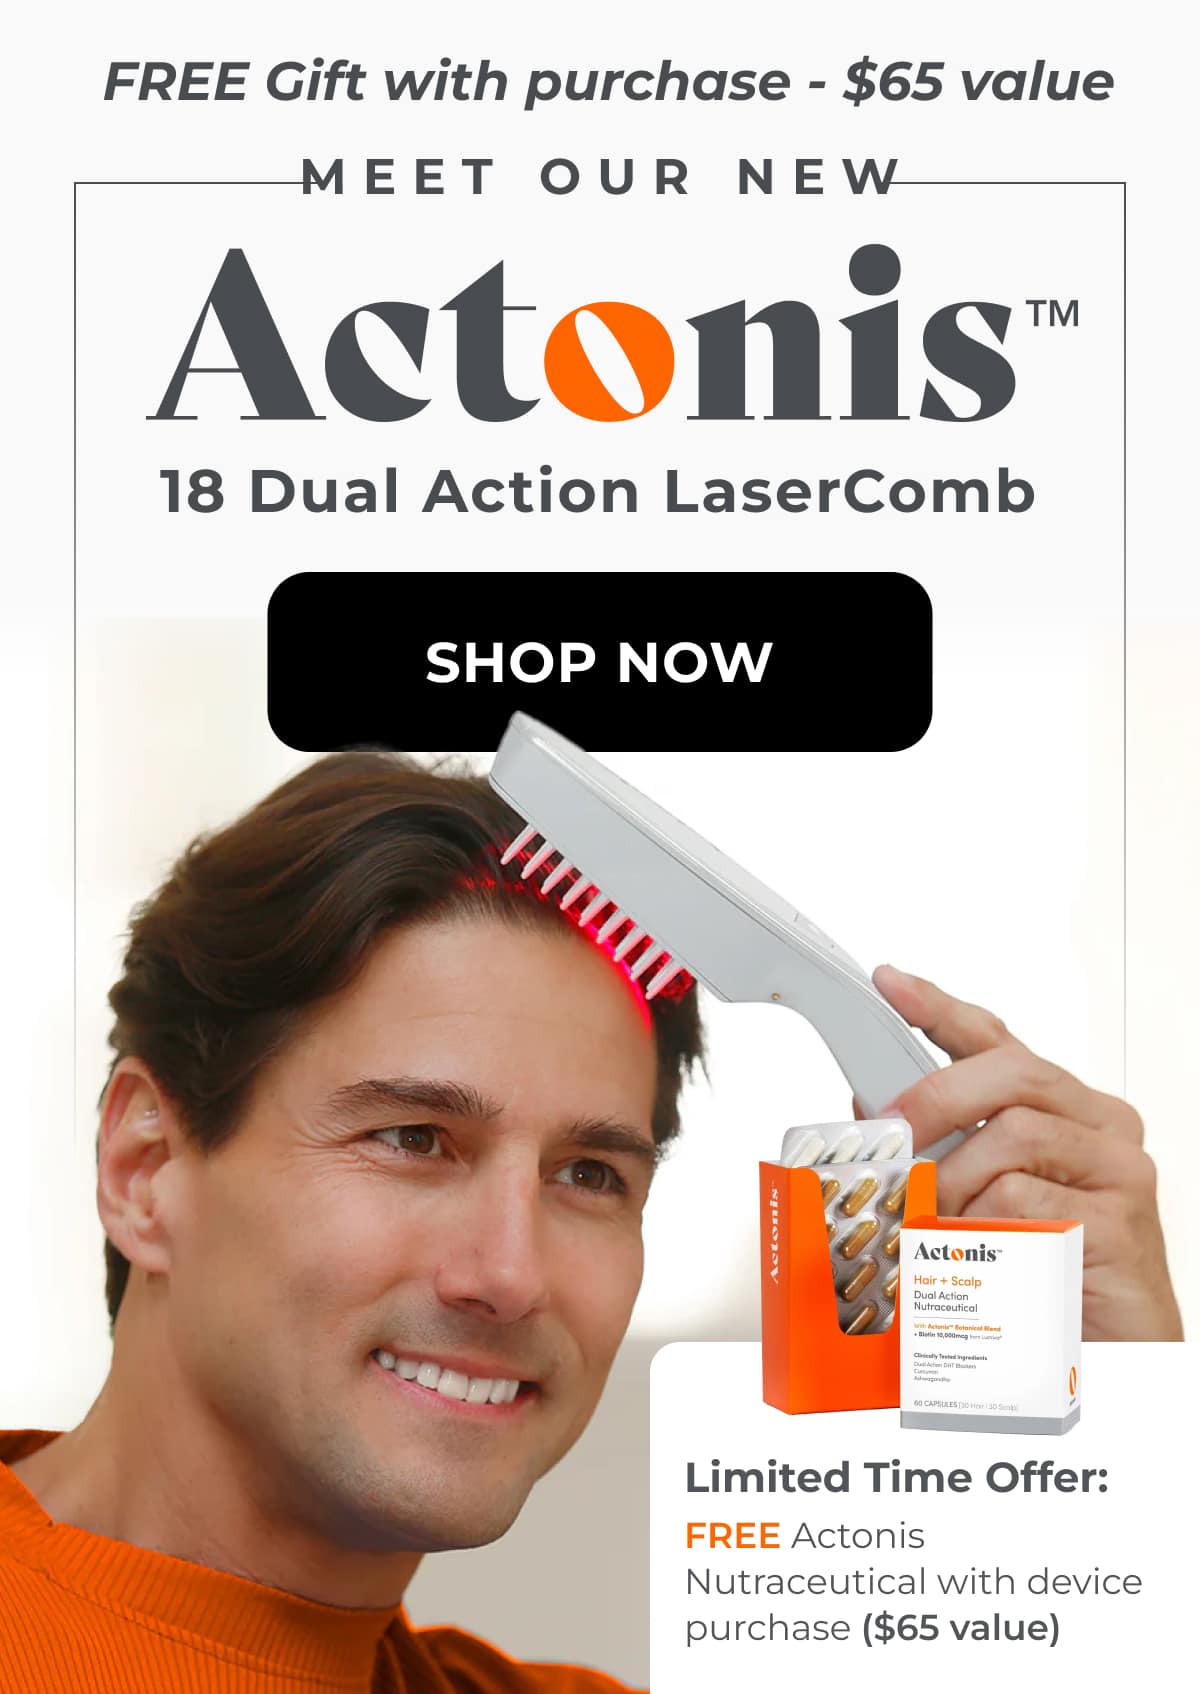 Grab Your Gift Before Its Gone. Buy Our Actonis 18 Dual Action LaserComb, Get a FREE Actonis Hair & Scalp Nutraceutical SHOP NOW